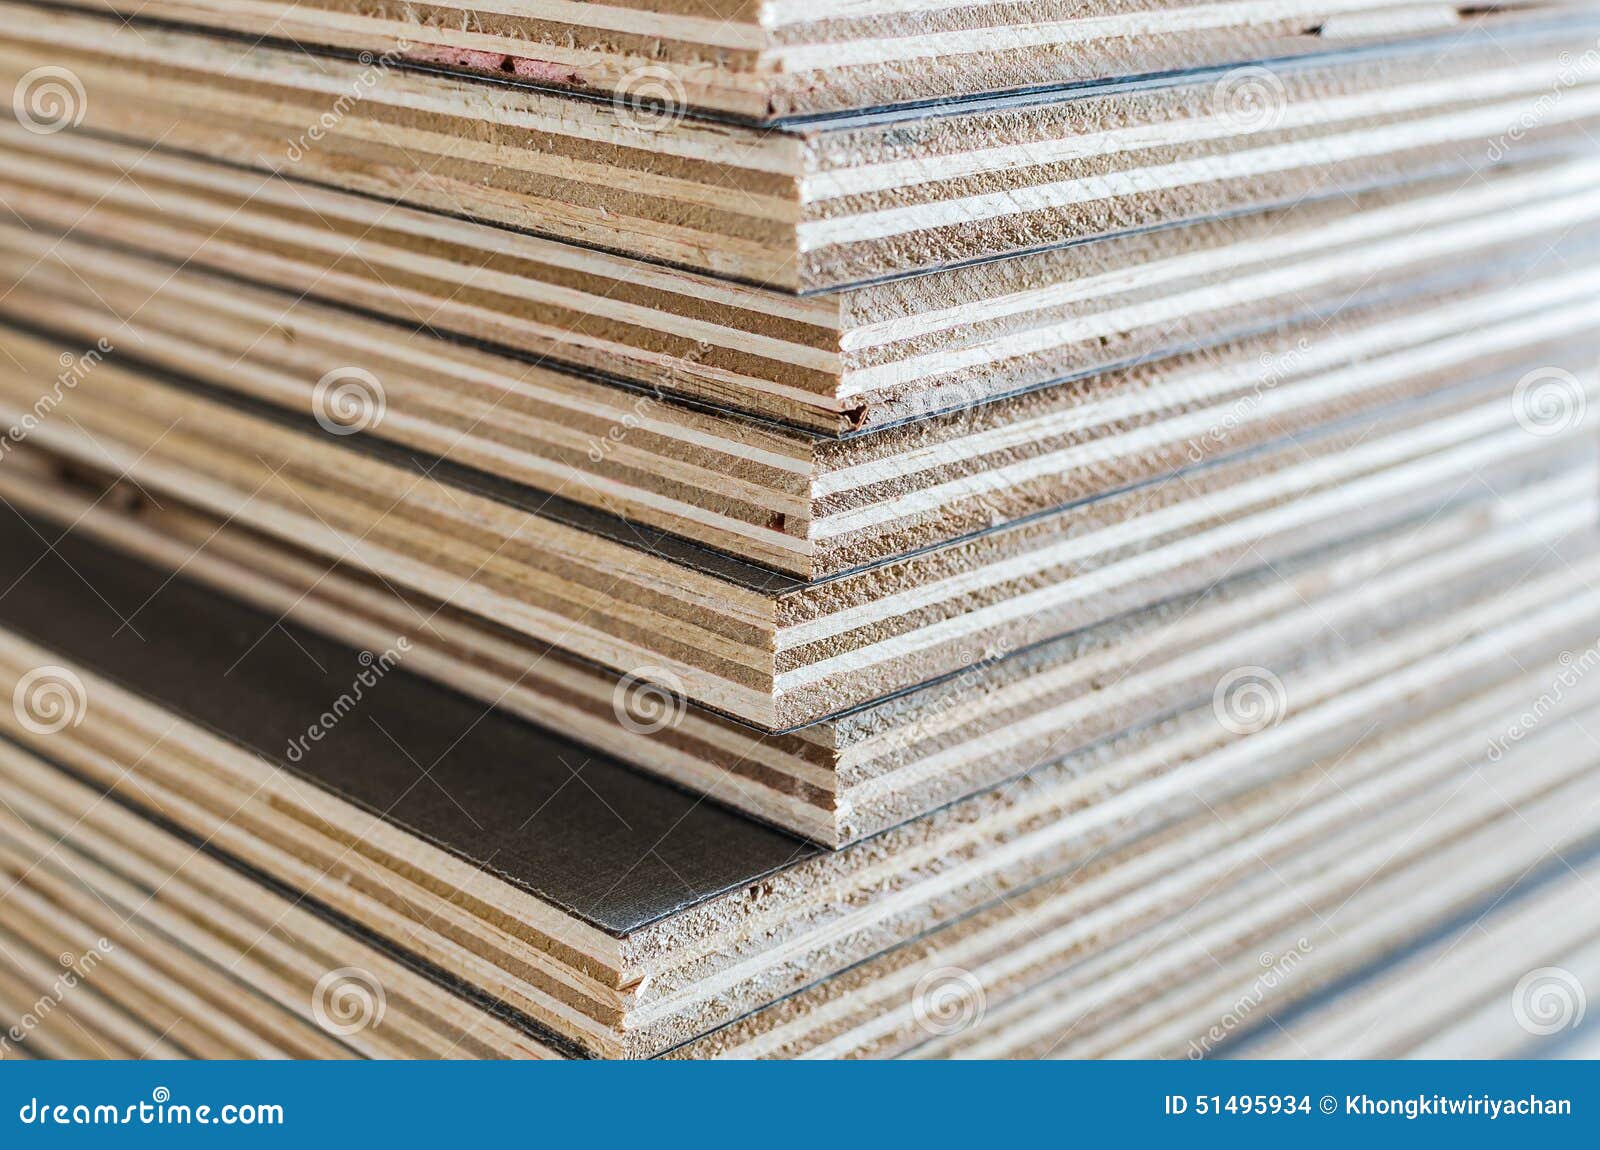 layer of plywood in construction site as background